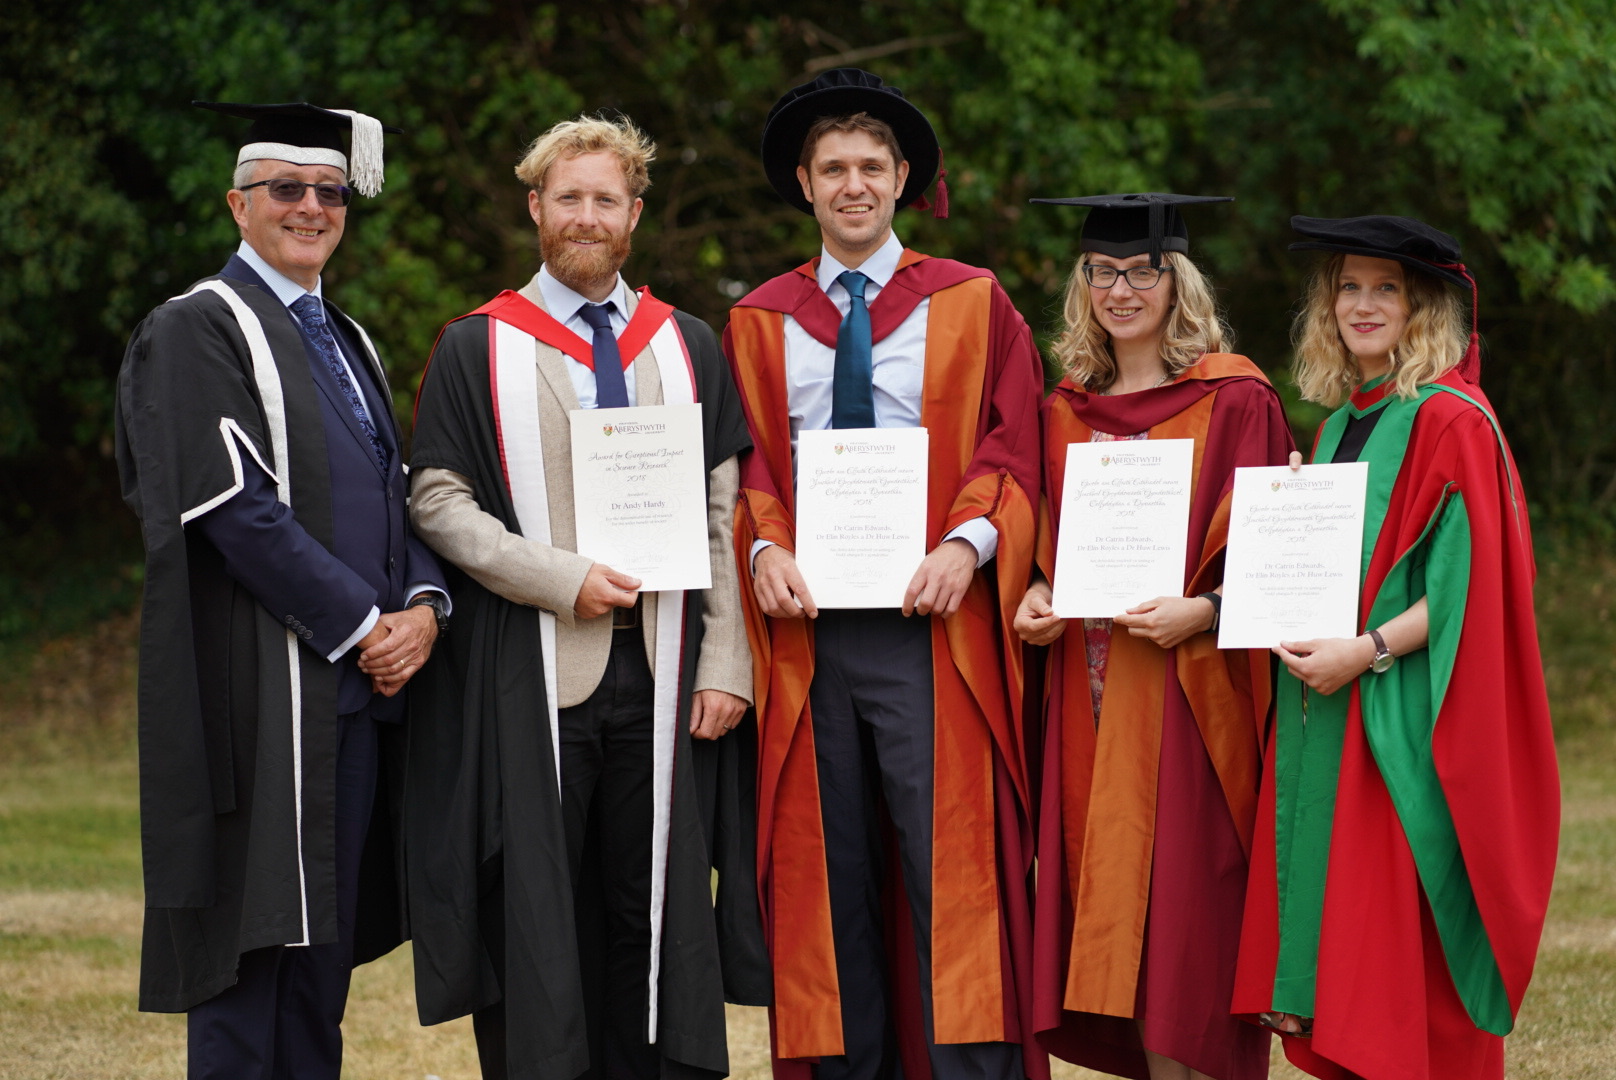 The winners of Aberystwyth University’s inaugural Awards for Exceptional Impact in Research are Dr Andy Hardy from the Department of Geography and Earth Sciences, and Dr Catrin Wyn Edwards, Dr Huw Lewis and Dr Elin Royles from the Department of International Politics, pictured here with Pro Vice-Chancellor Professor John Grattan.